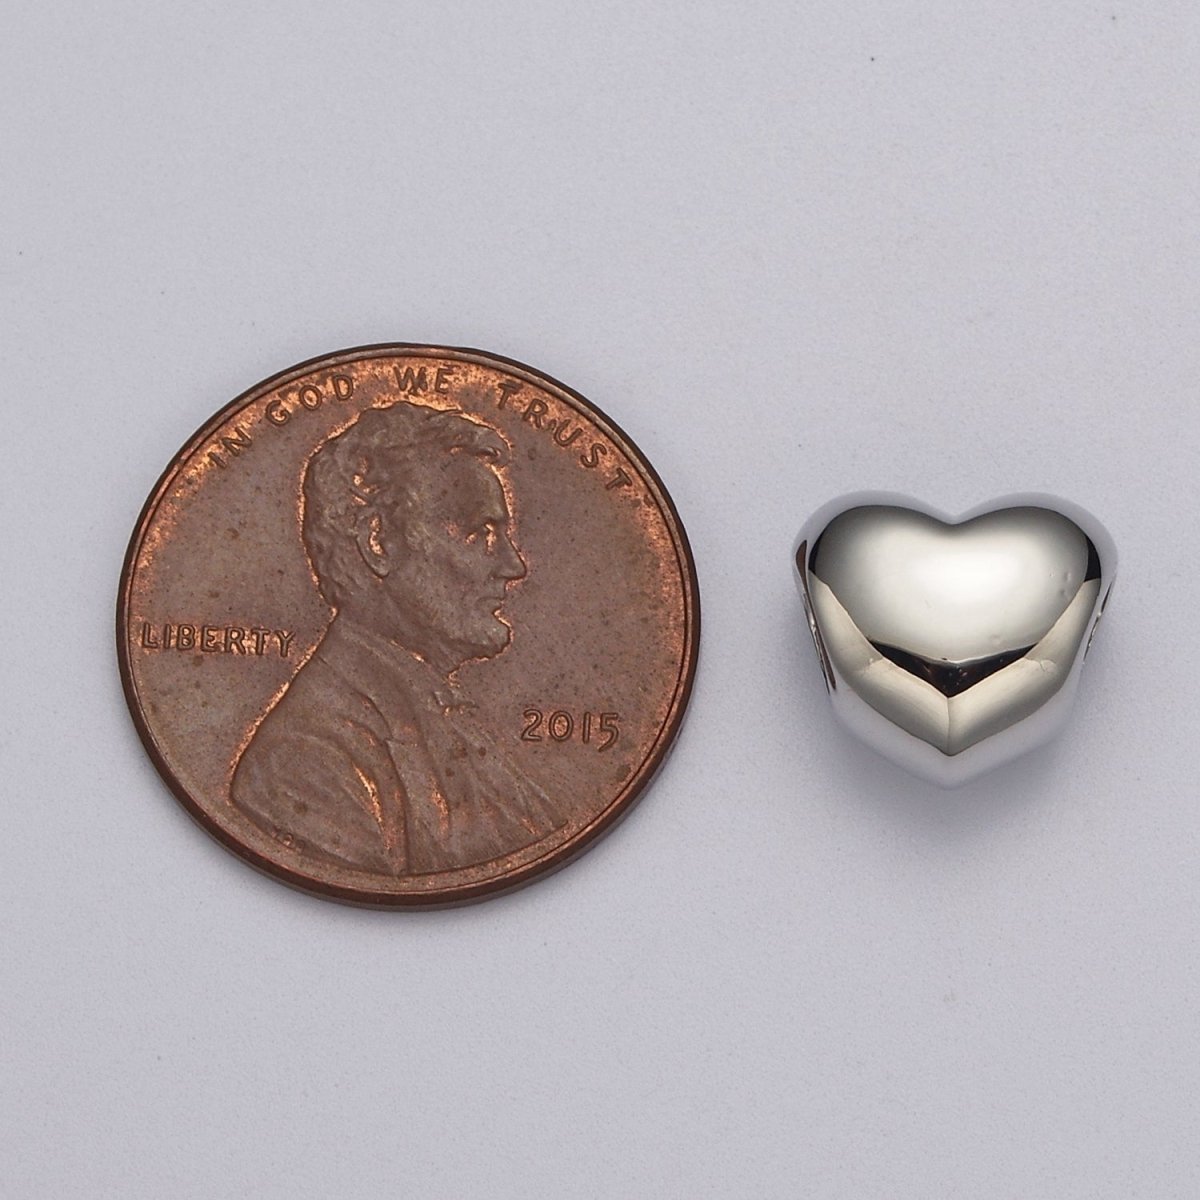 Rose Gold / Silver / Black Heart Spacer Beads, Heart Shape Spacer Charms Big Hole Bead High Quality Beads B-182 B-183 B-184 - DLUXCA